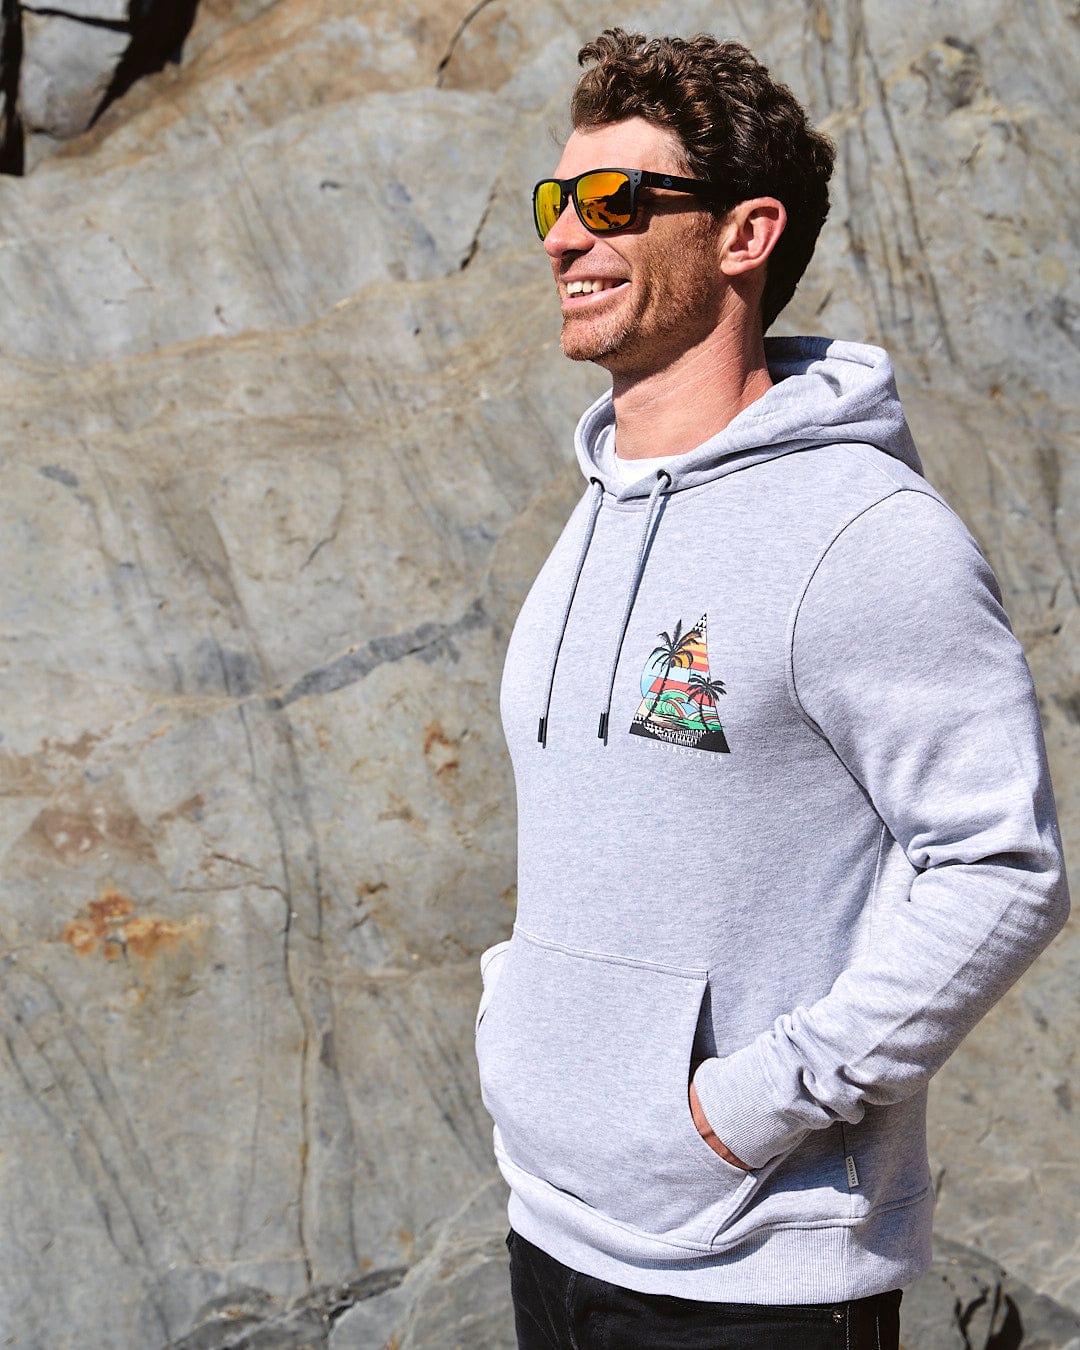 A man wearing sunglasses and a hoodie standing in front of rocks.